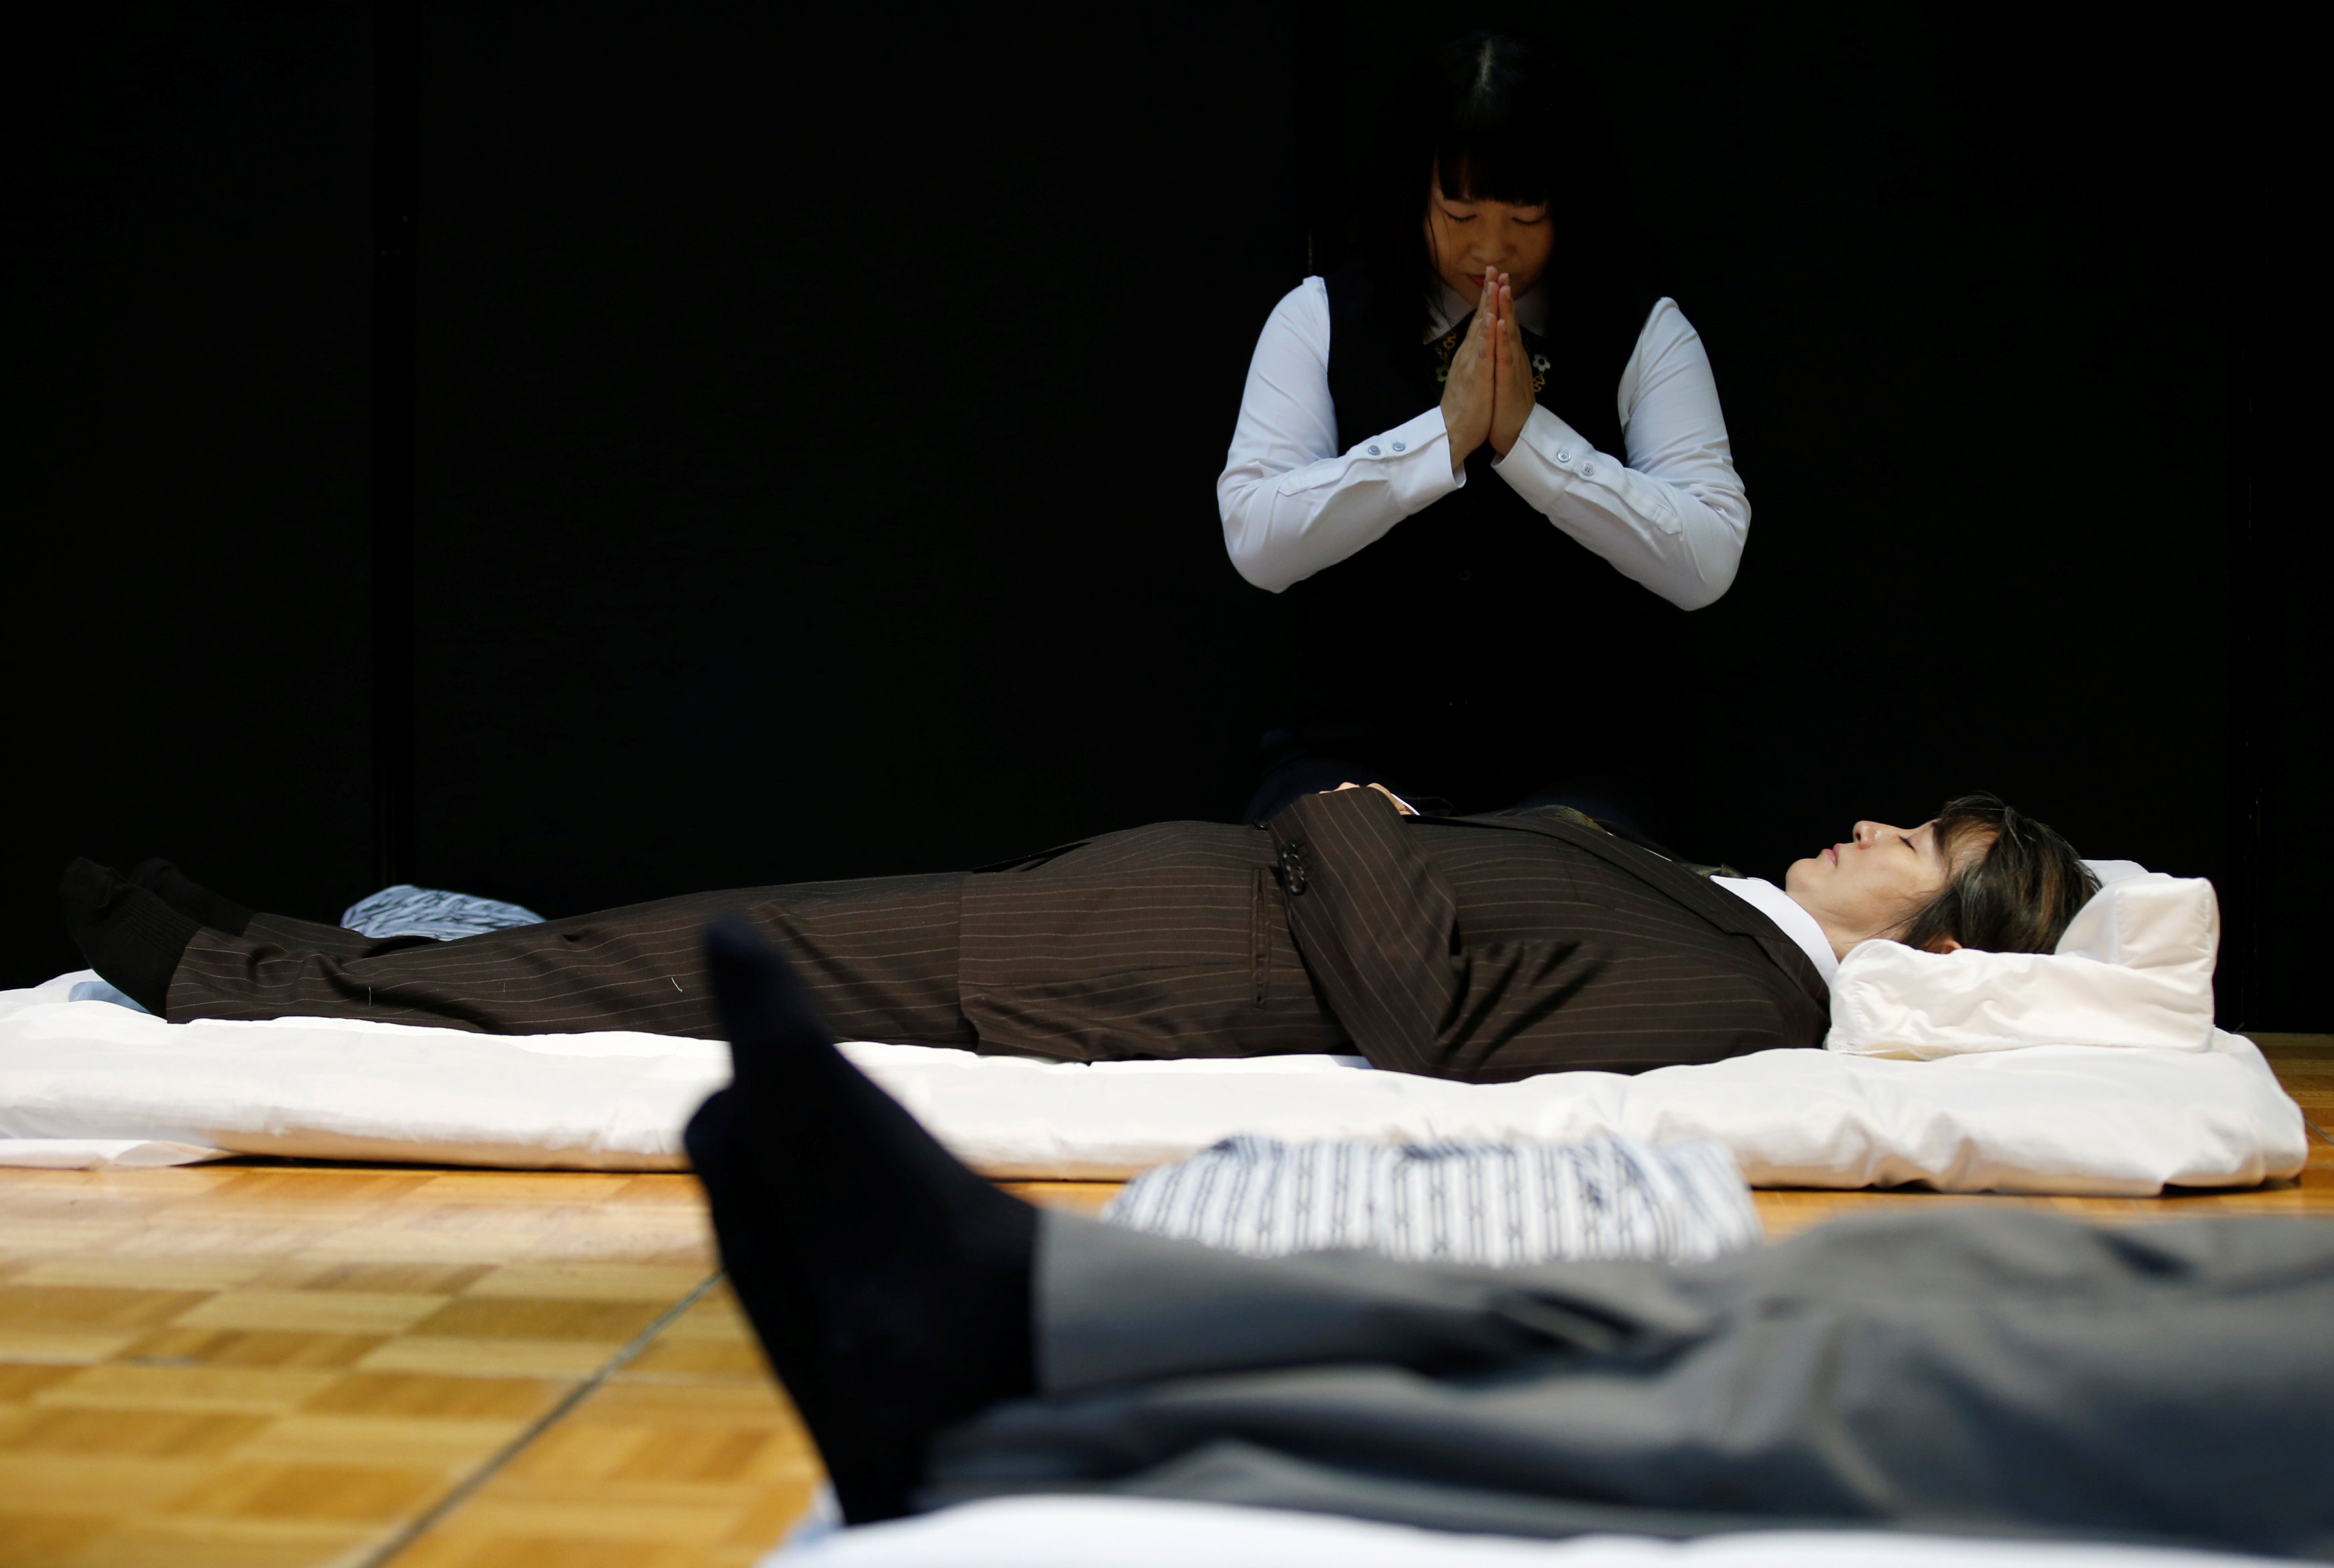 A funeral undertaker prays after dressing a model during an encoffinment competition at Life Ending Industry EXPO 2017 in Tokyo, Japan August 24, 2017 REUTERS/Kim Kyung-Hoon